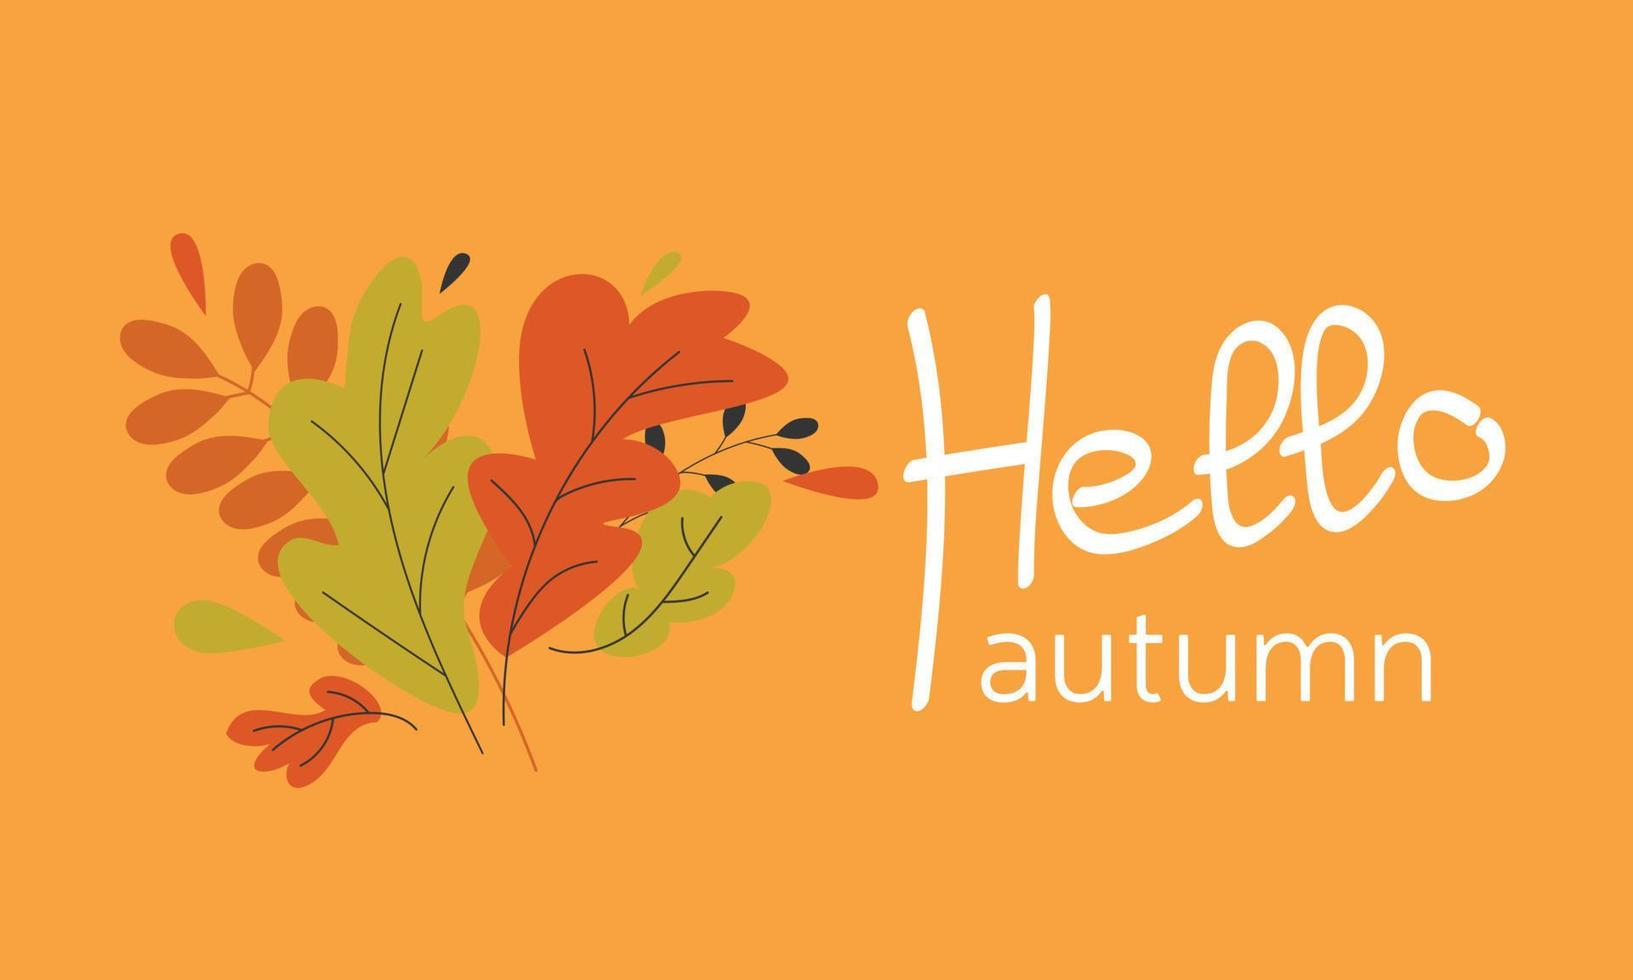 Hello autumn banner or card background with abstract leaves in orange and green color. vector illustration